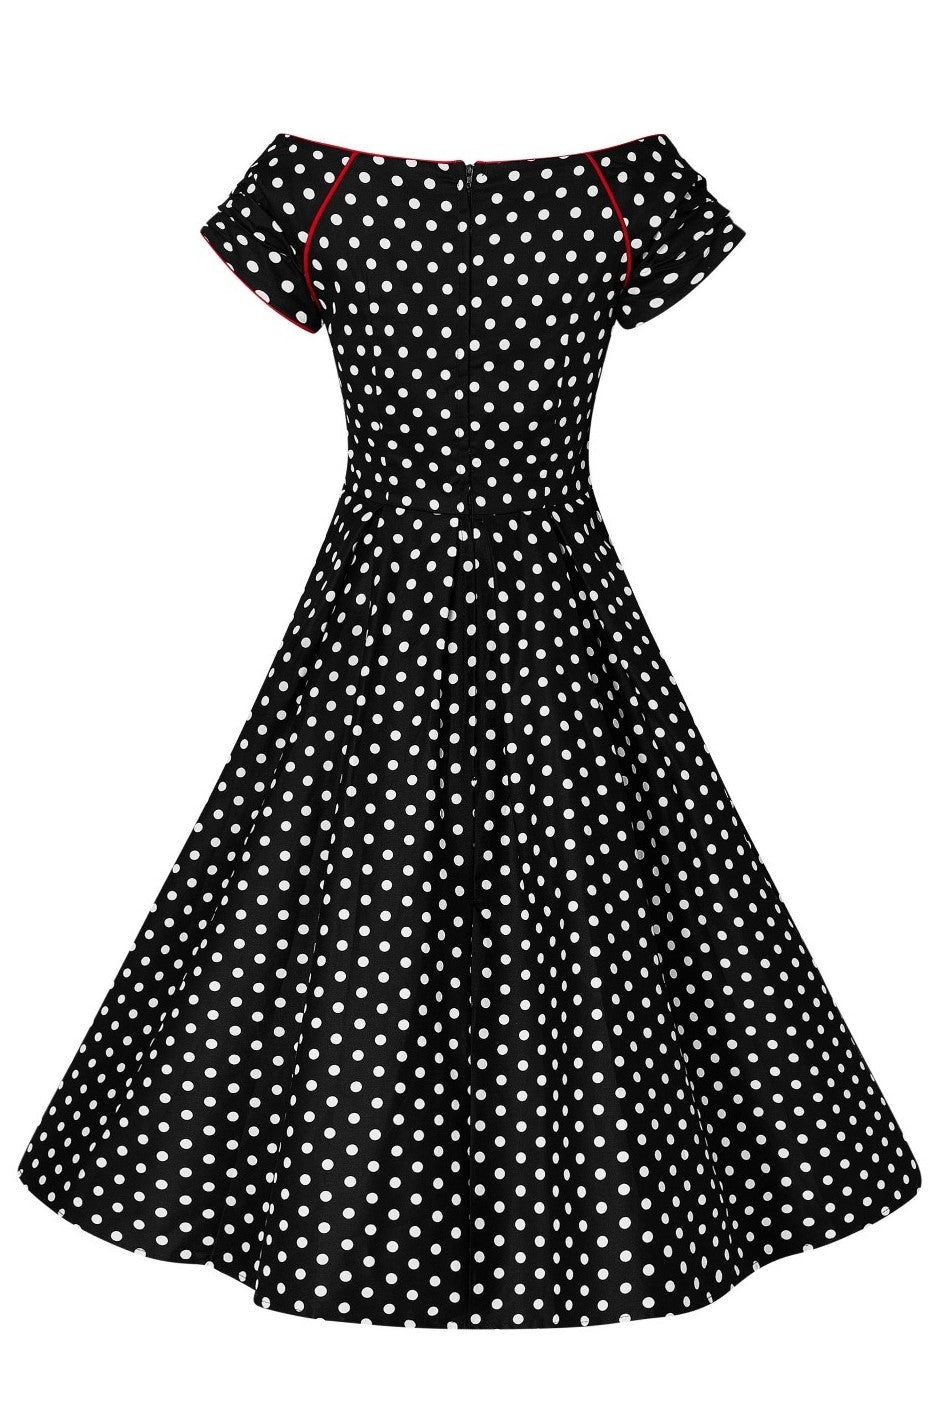 Lily short sleeved swing dress, in black, with white polka dots, back view